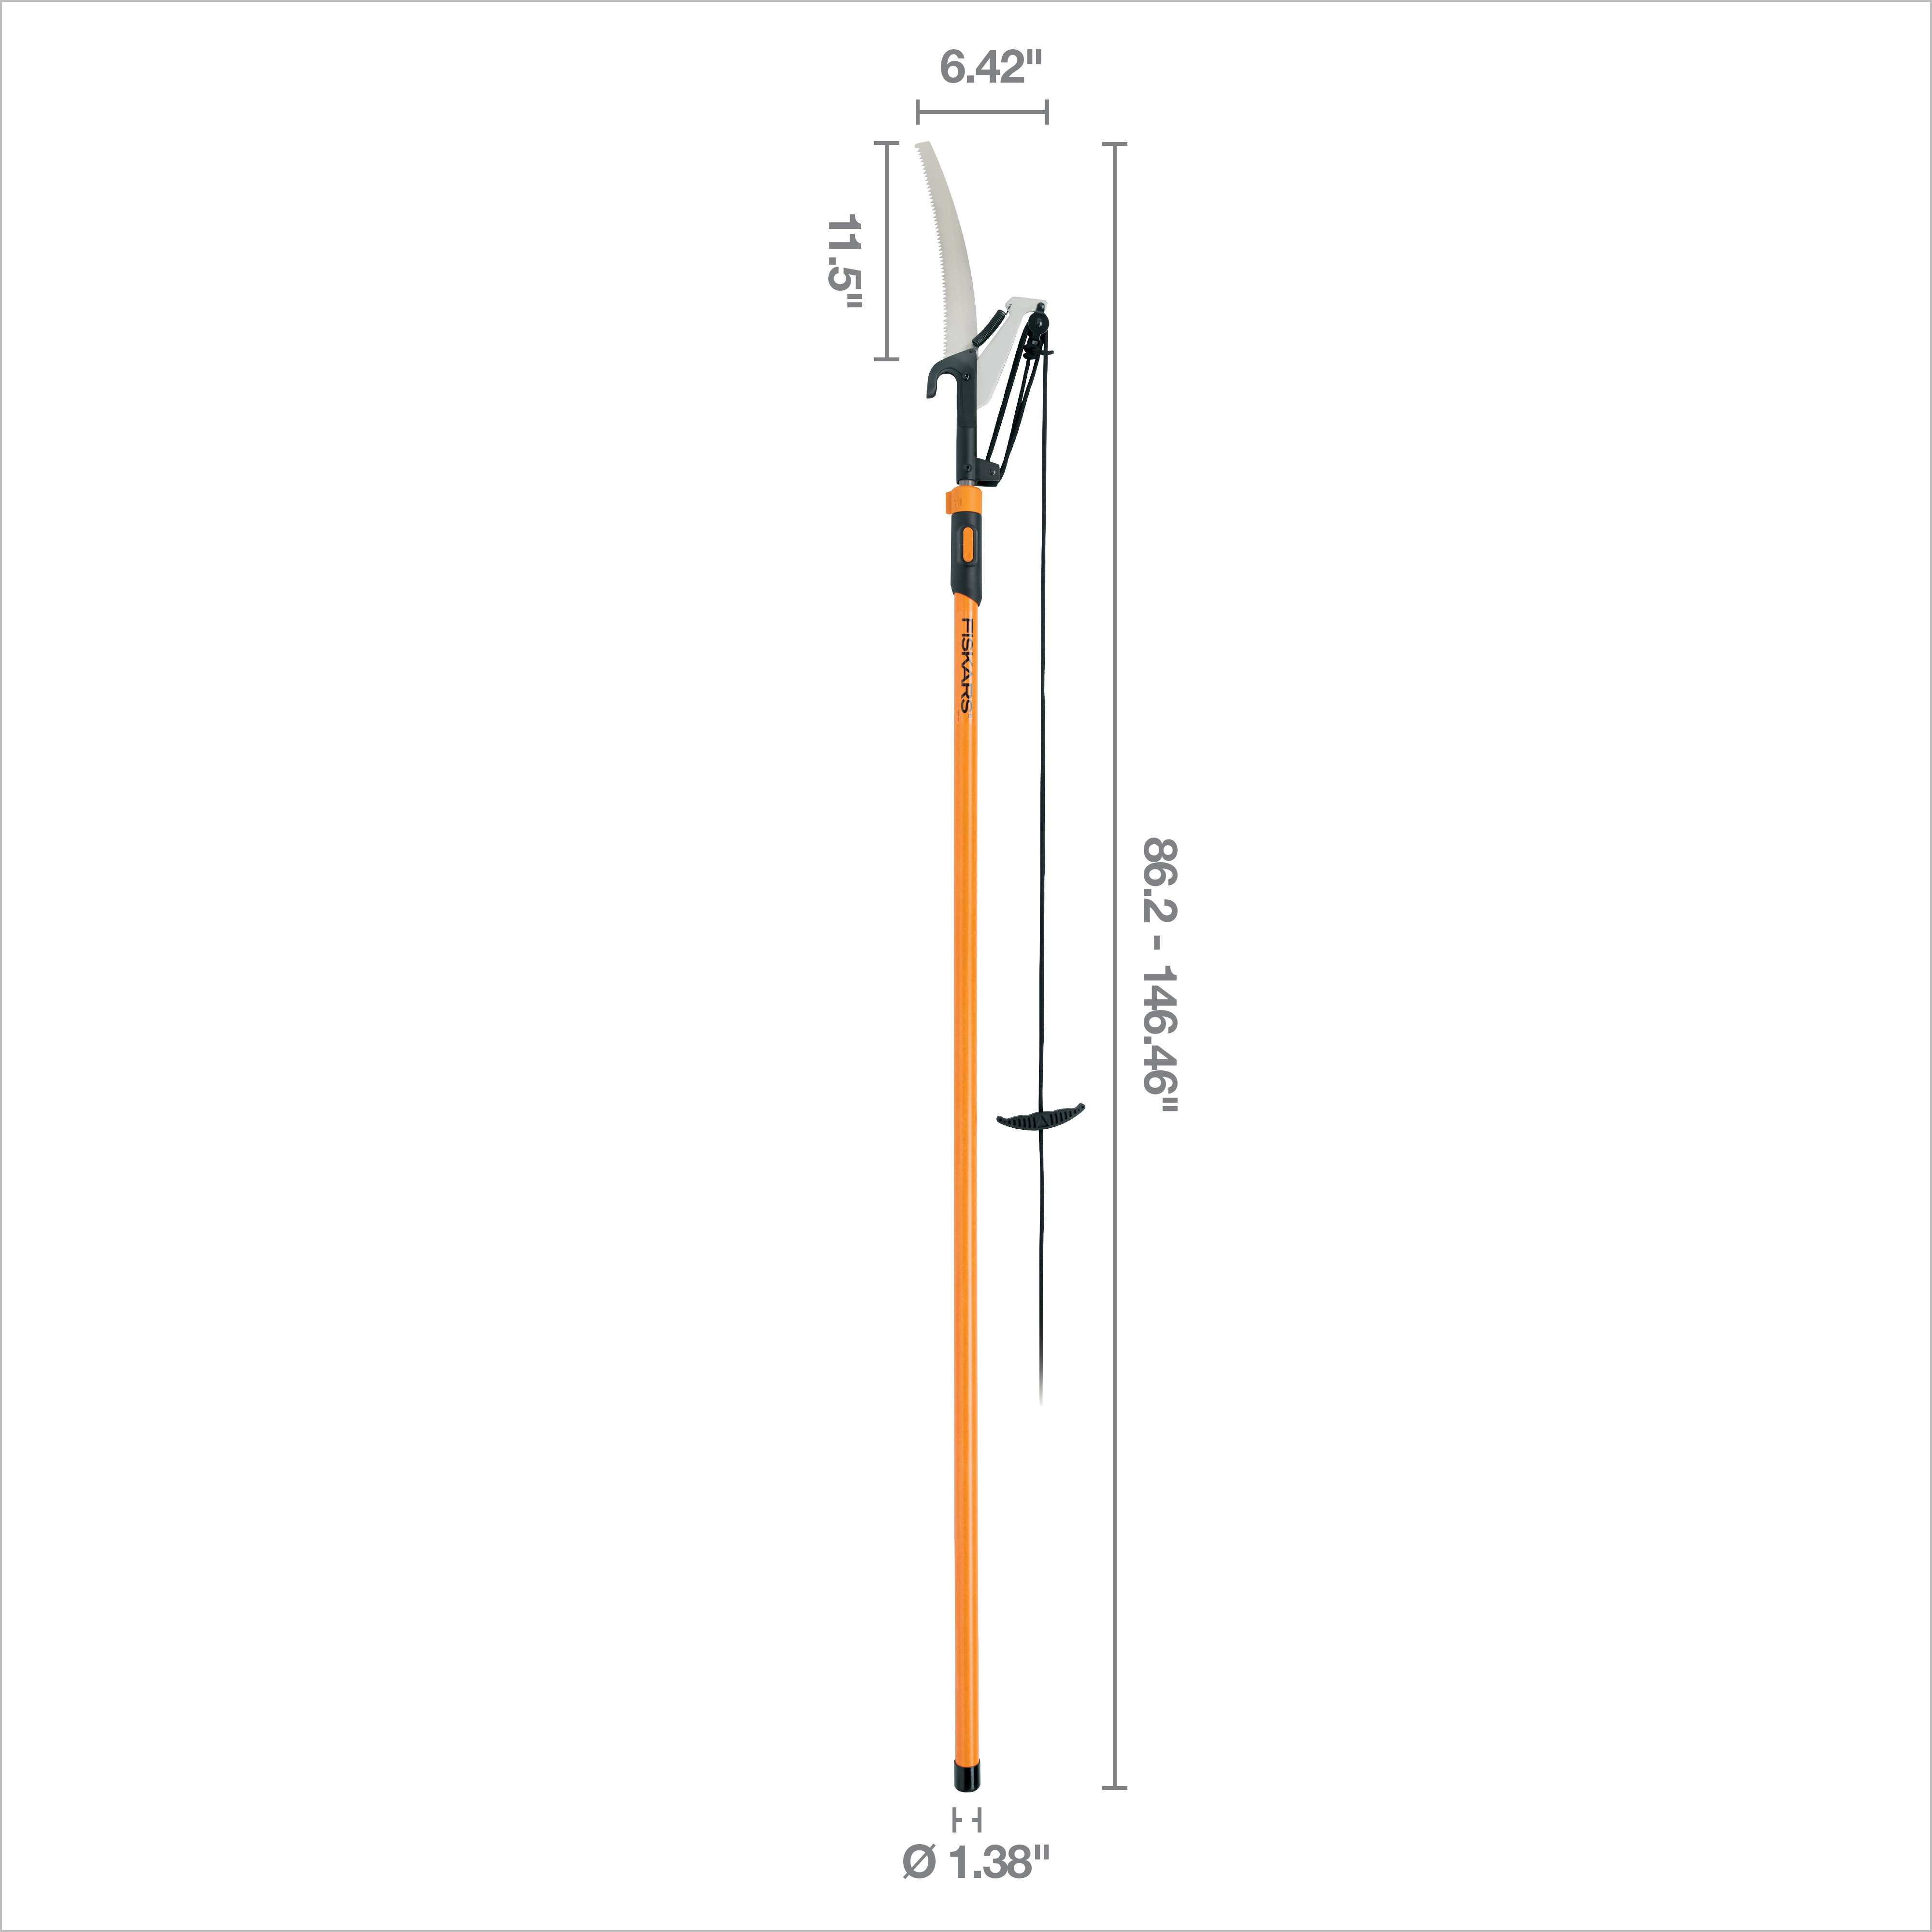 Fiskars Extendable 7-12ft Tree Pruner and Pole Saw, 12in Double Grind Saw - image 3 of 7